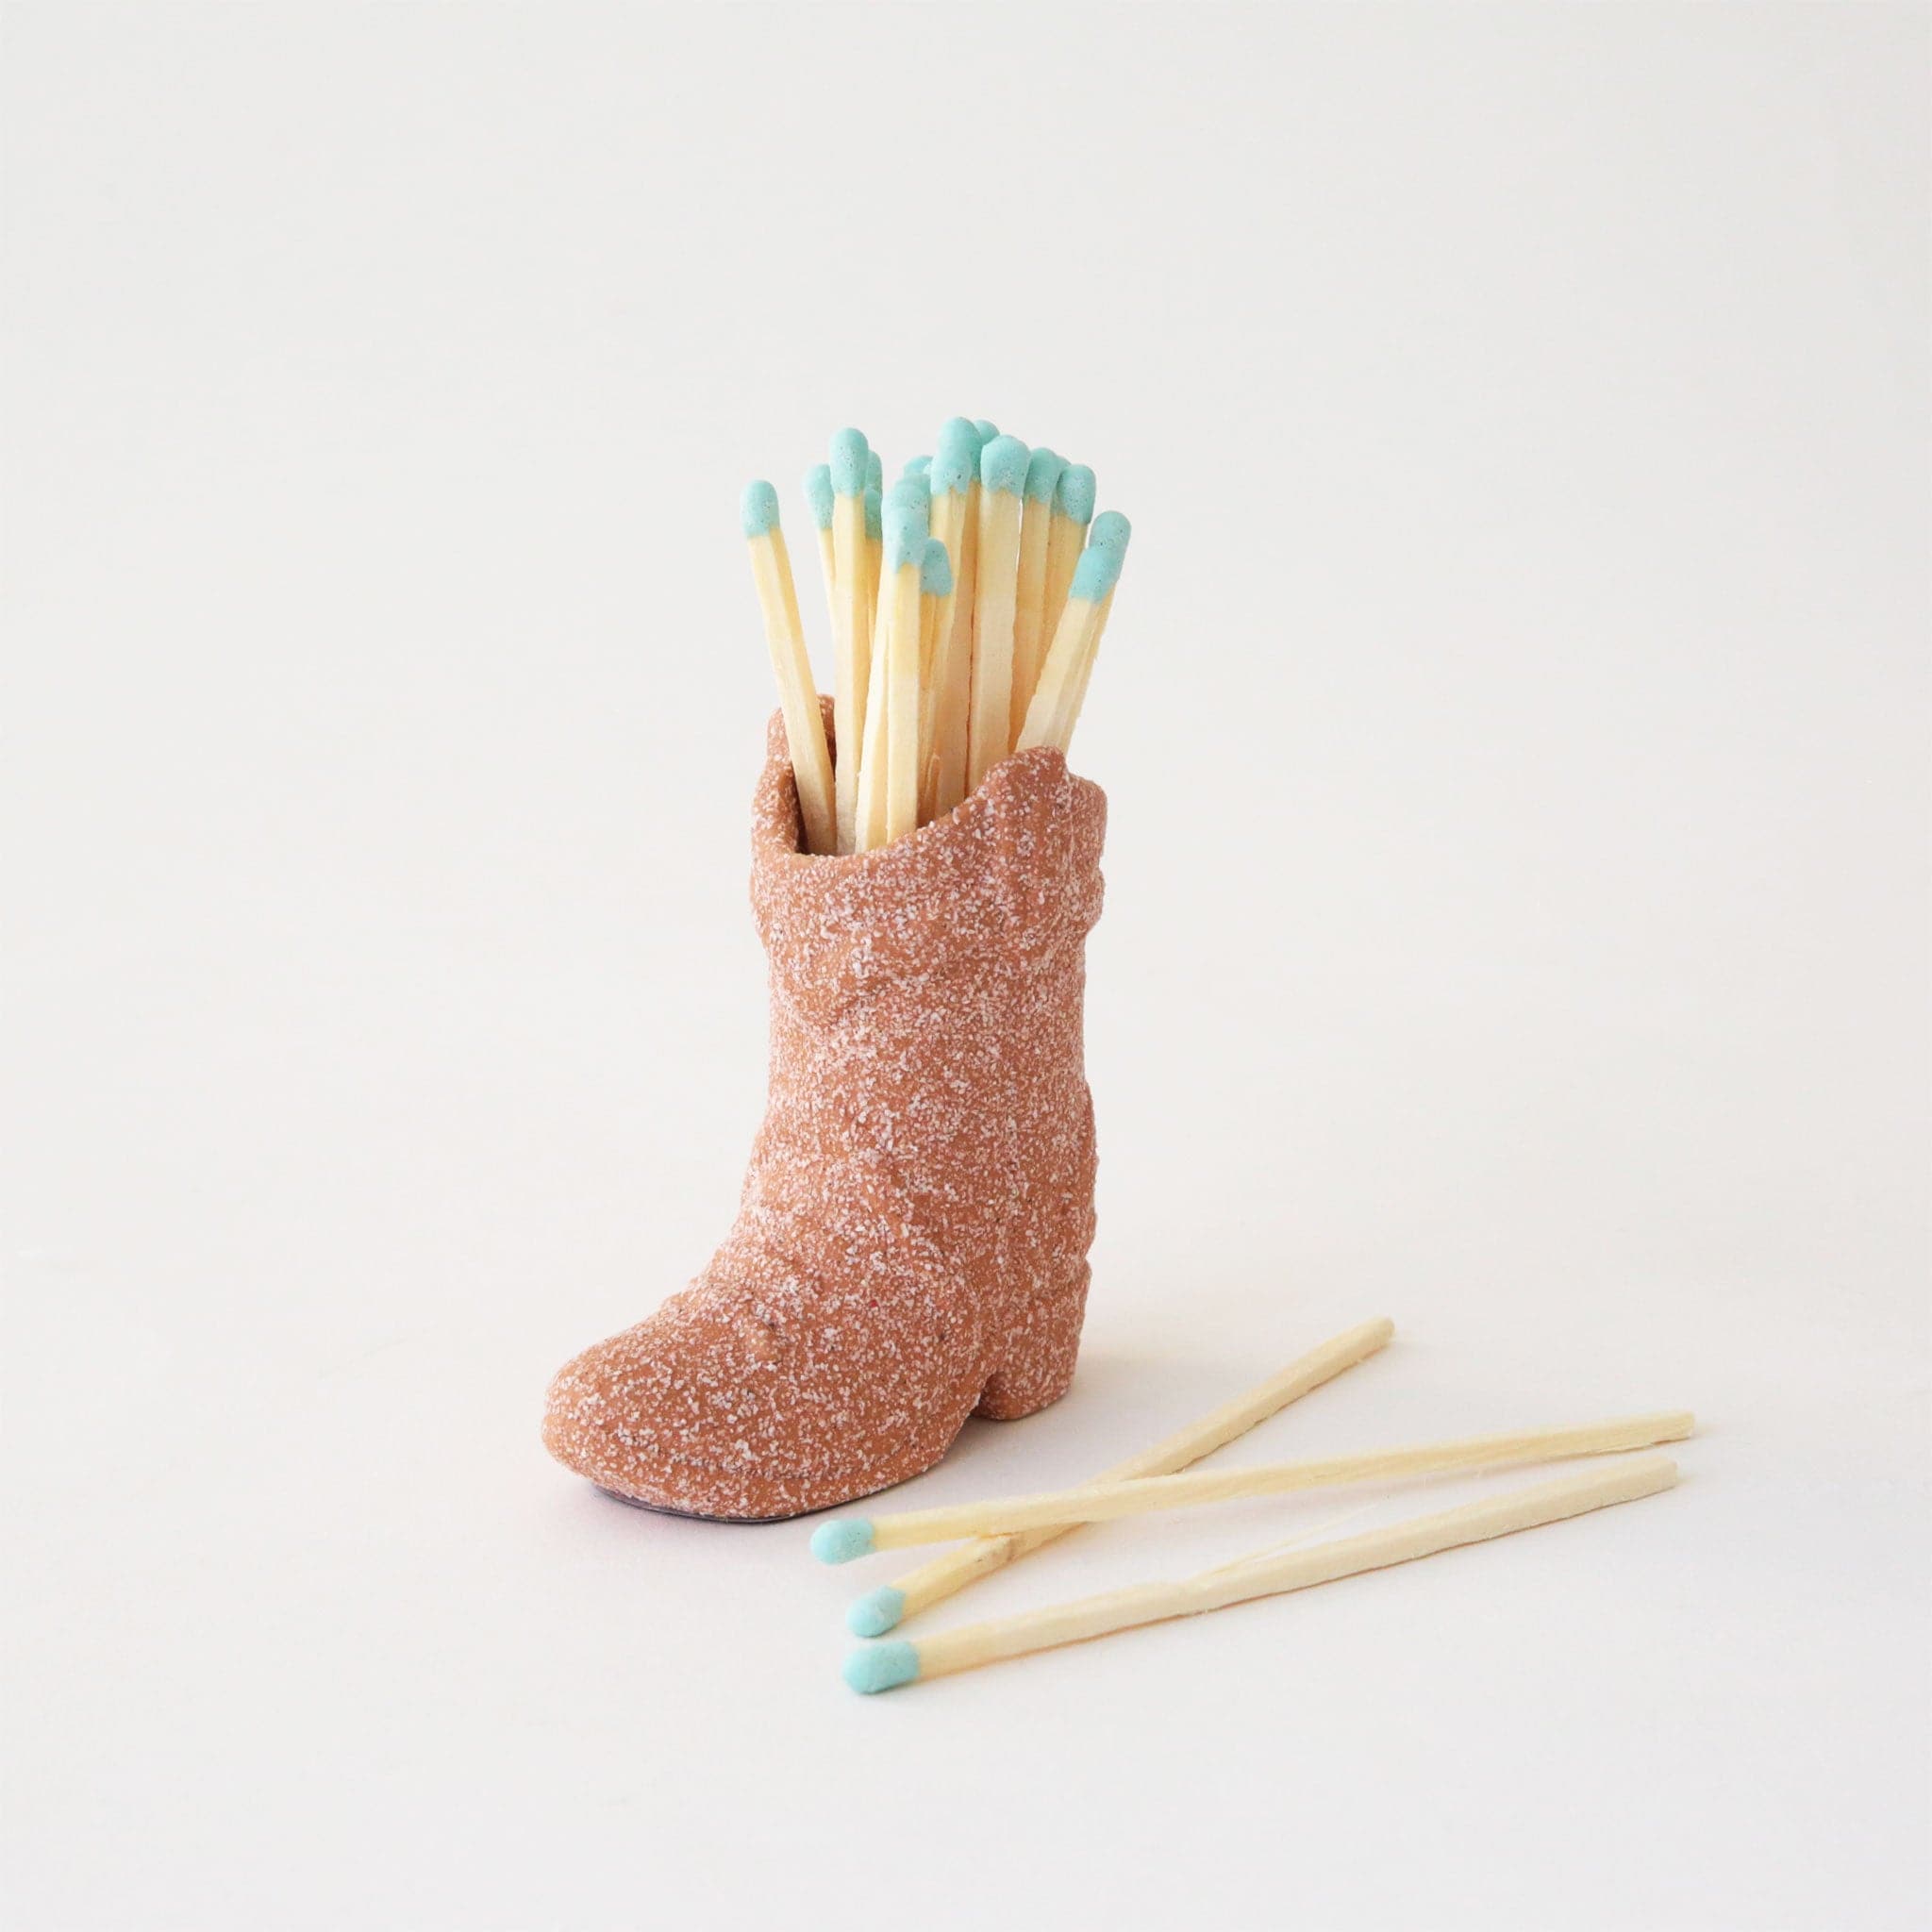 Terracotta ceramic boot match holder filled with a bundle of baby blue dipped matches. Three matches lay loose in front.